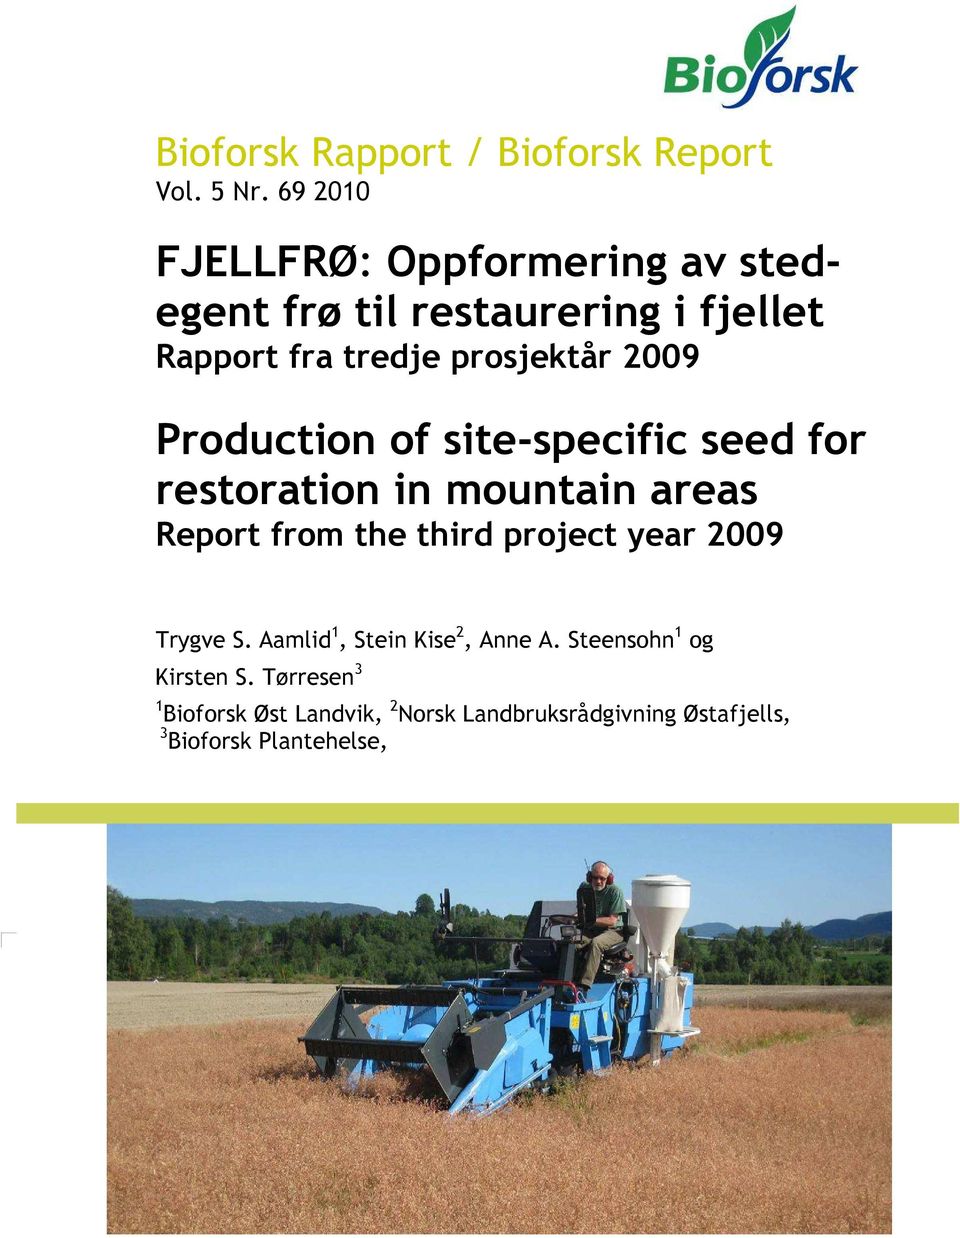 2009 Production of site-specific seed for restoration in mountain areas Report from the third project year